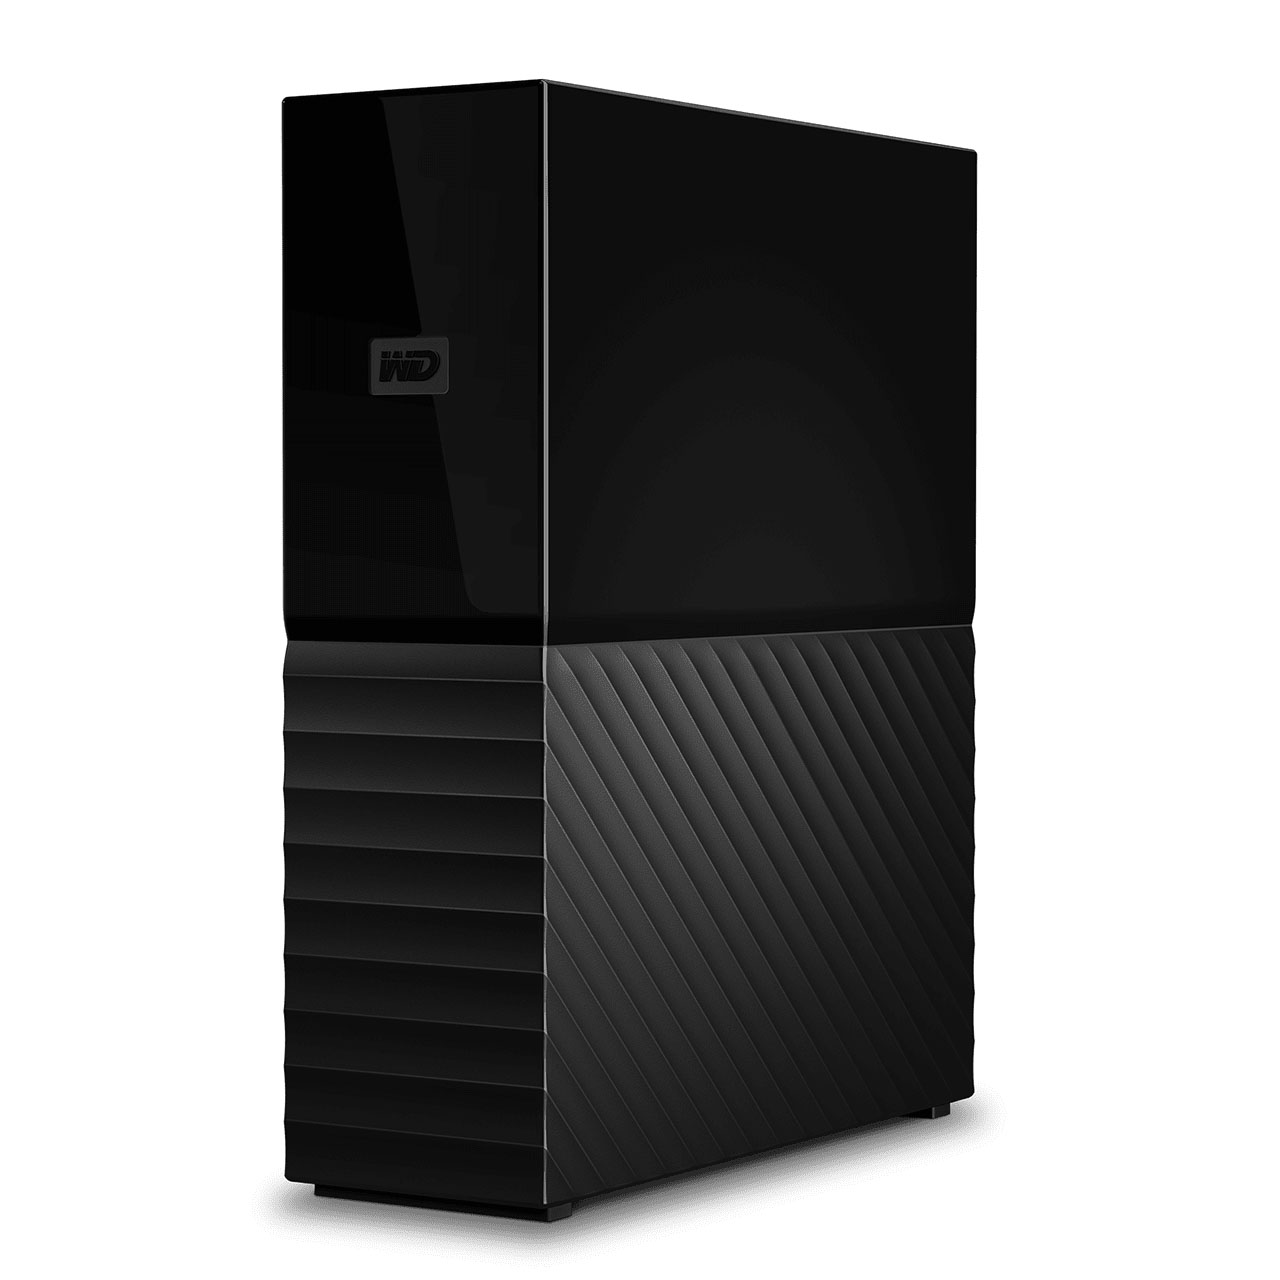 Western Digital My Book, 22TB: Best if you need A LOT of storage